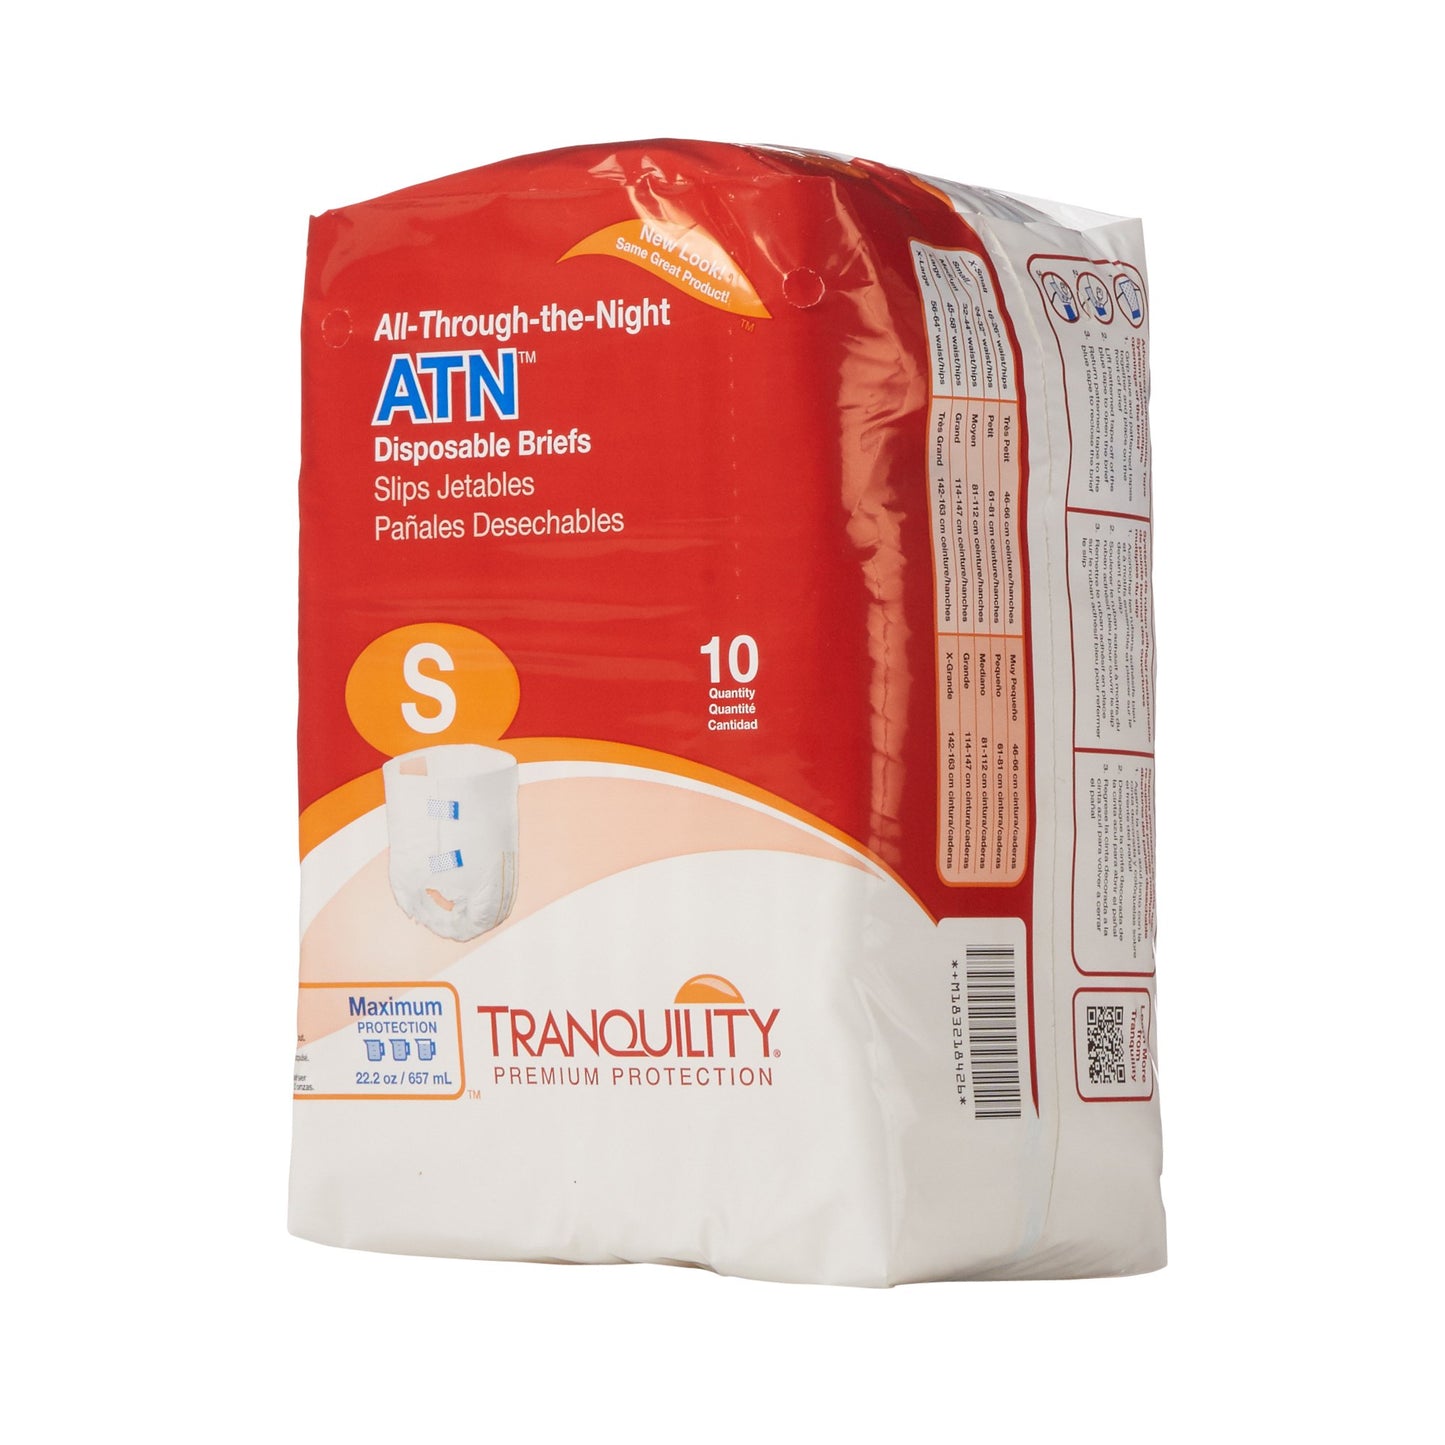 Tranquility® ATN Maximum Protection Incontinence Brief, Small, 10 ct